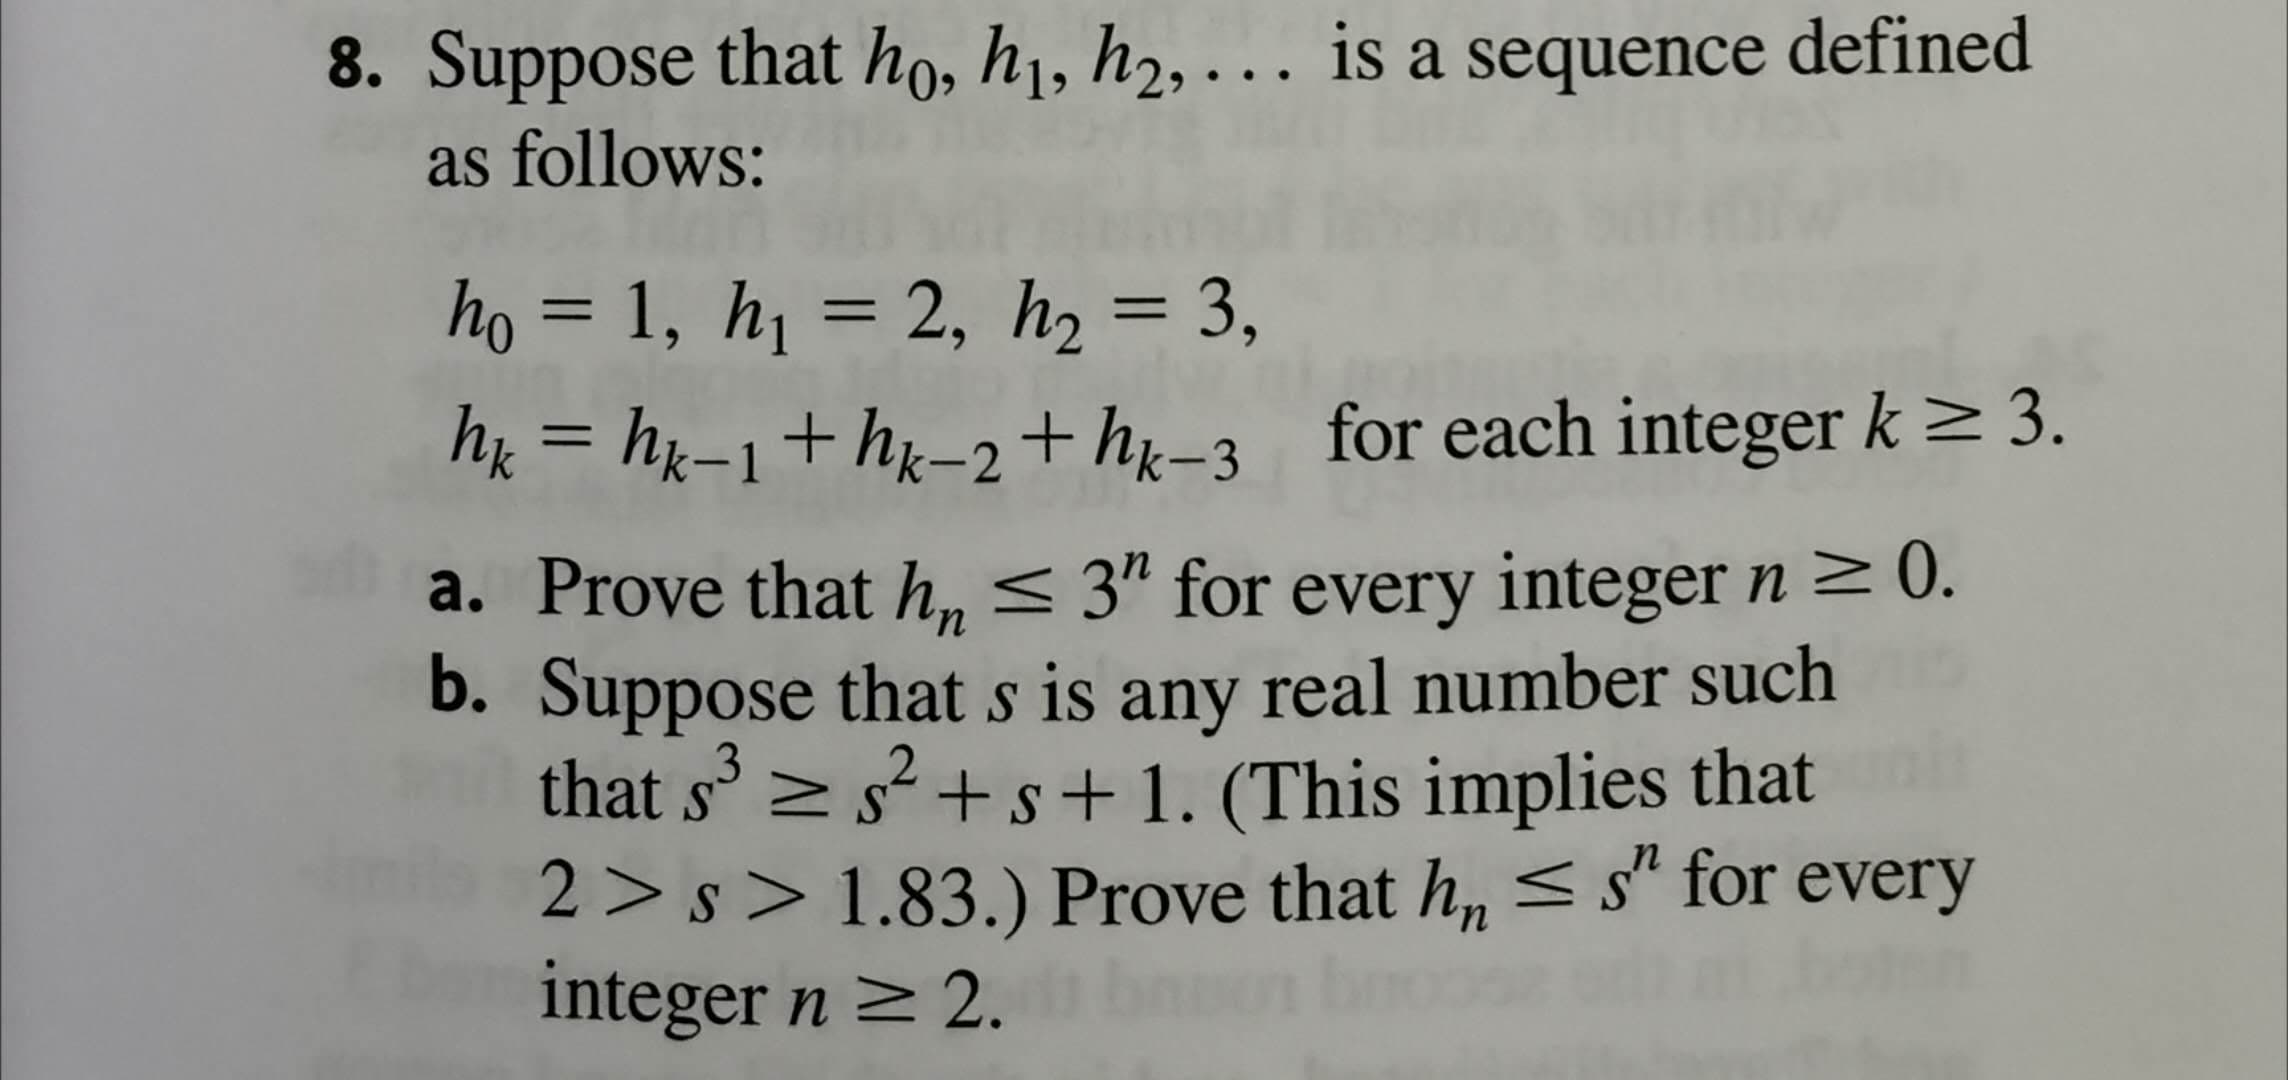 8. Suppose that họ, h1, h2, . is a sequence defined
as follows:
ho = 1, h1 = 2, h2 = 3,
%3D
h = hx-1+hx-2+h=3 for each integer k > 3.
a. Prove that h, < 3" for every integer n > ).
b. Suppose that s is any real number such
that s' >
s +s+1. (This implies that
2 > s > 1.83.) Prove that h, <s" for every
integer n 2.
